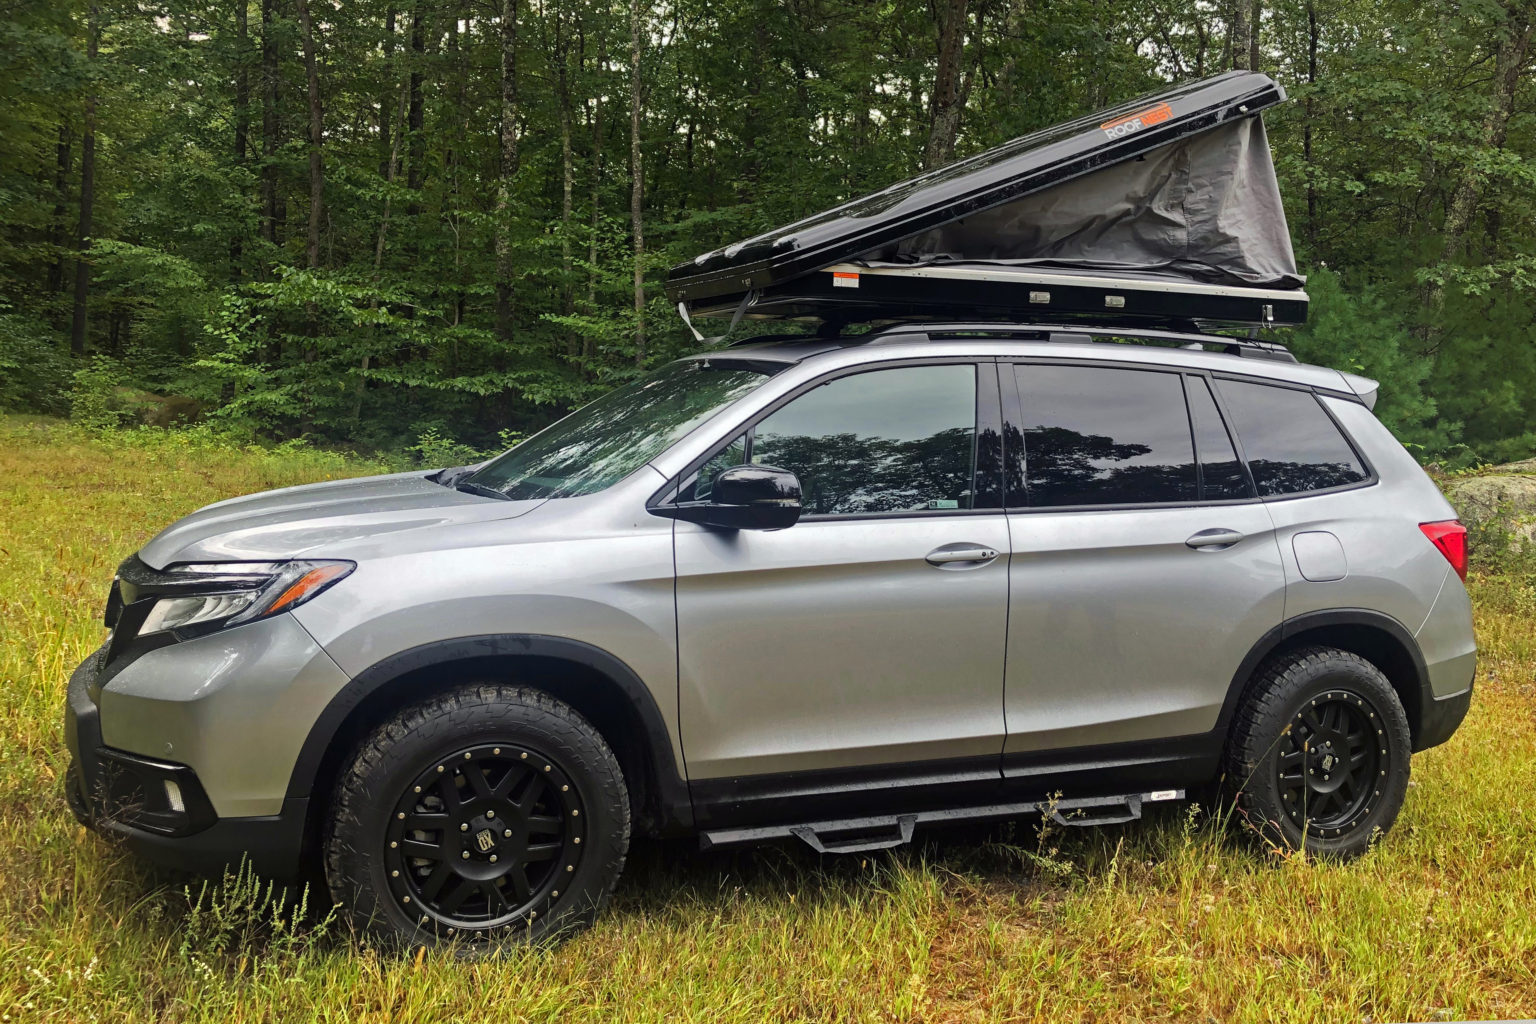 The Roofnest Sparrow rooftop tent fits snugly on the Honda Passport.